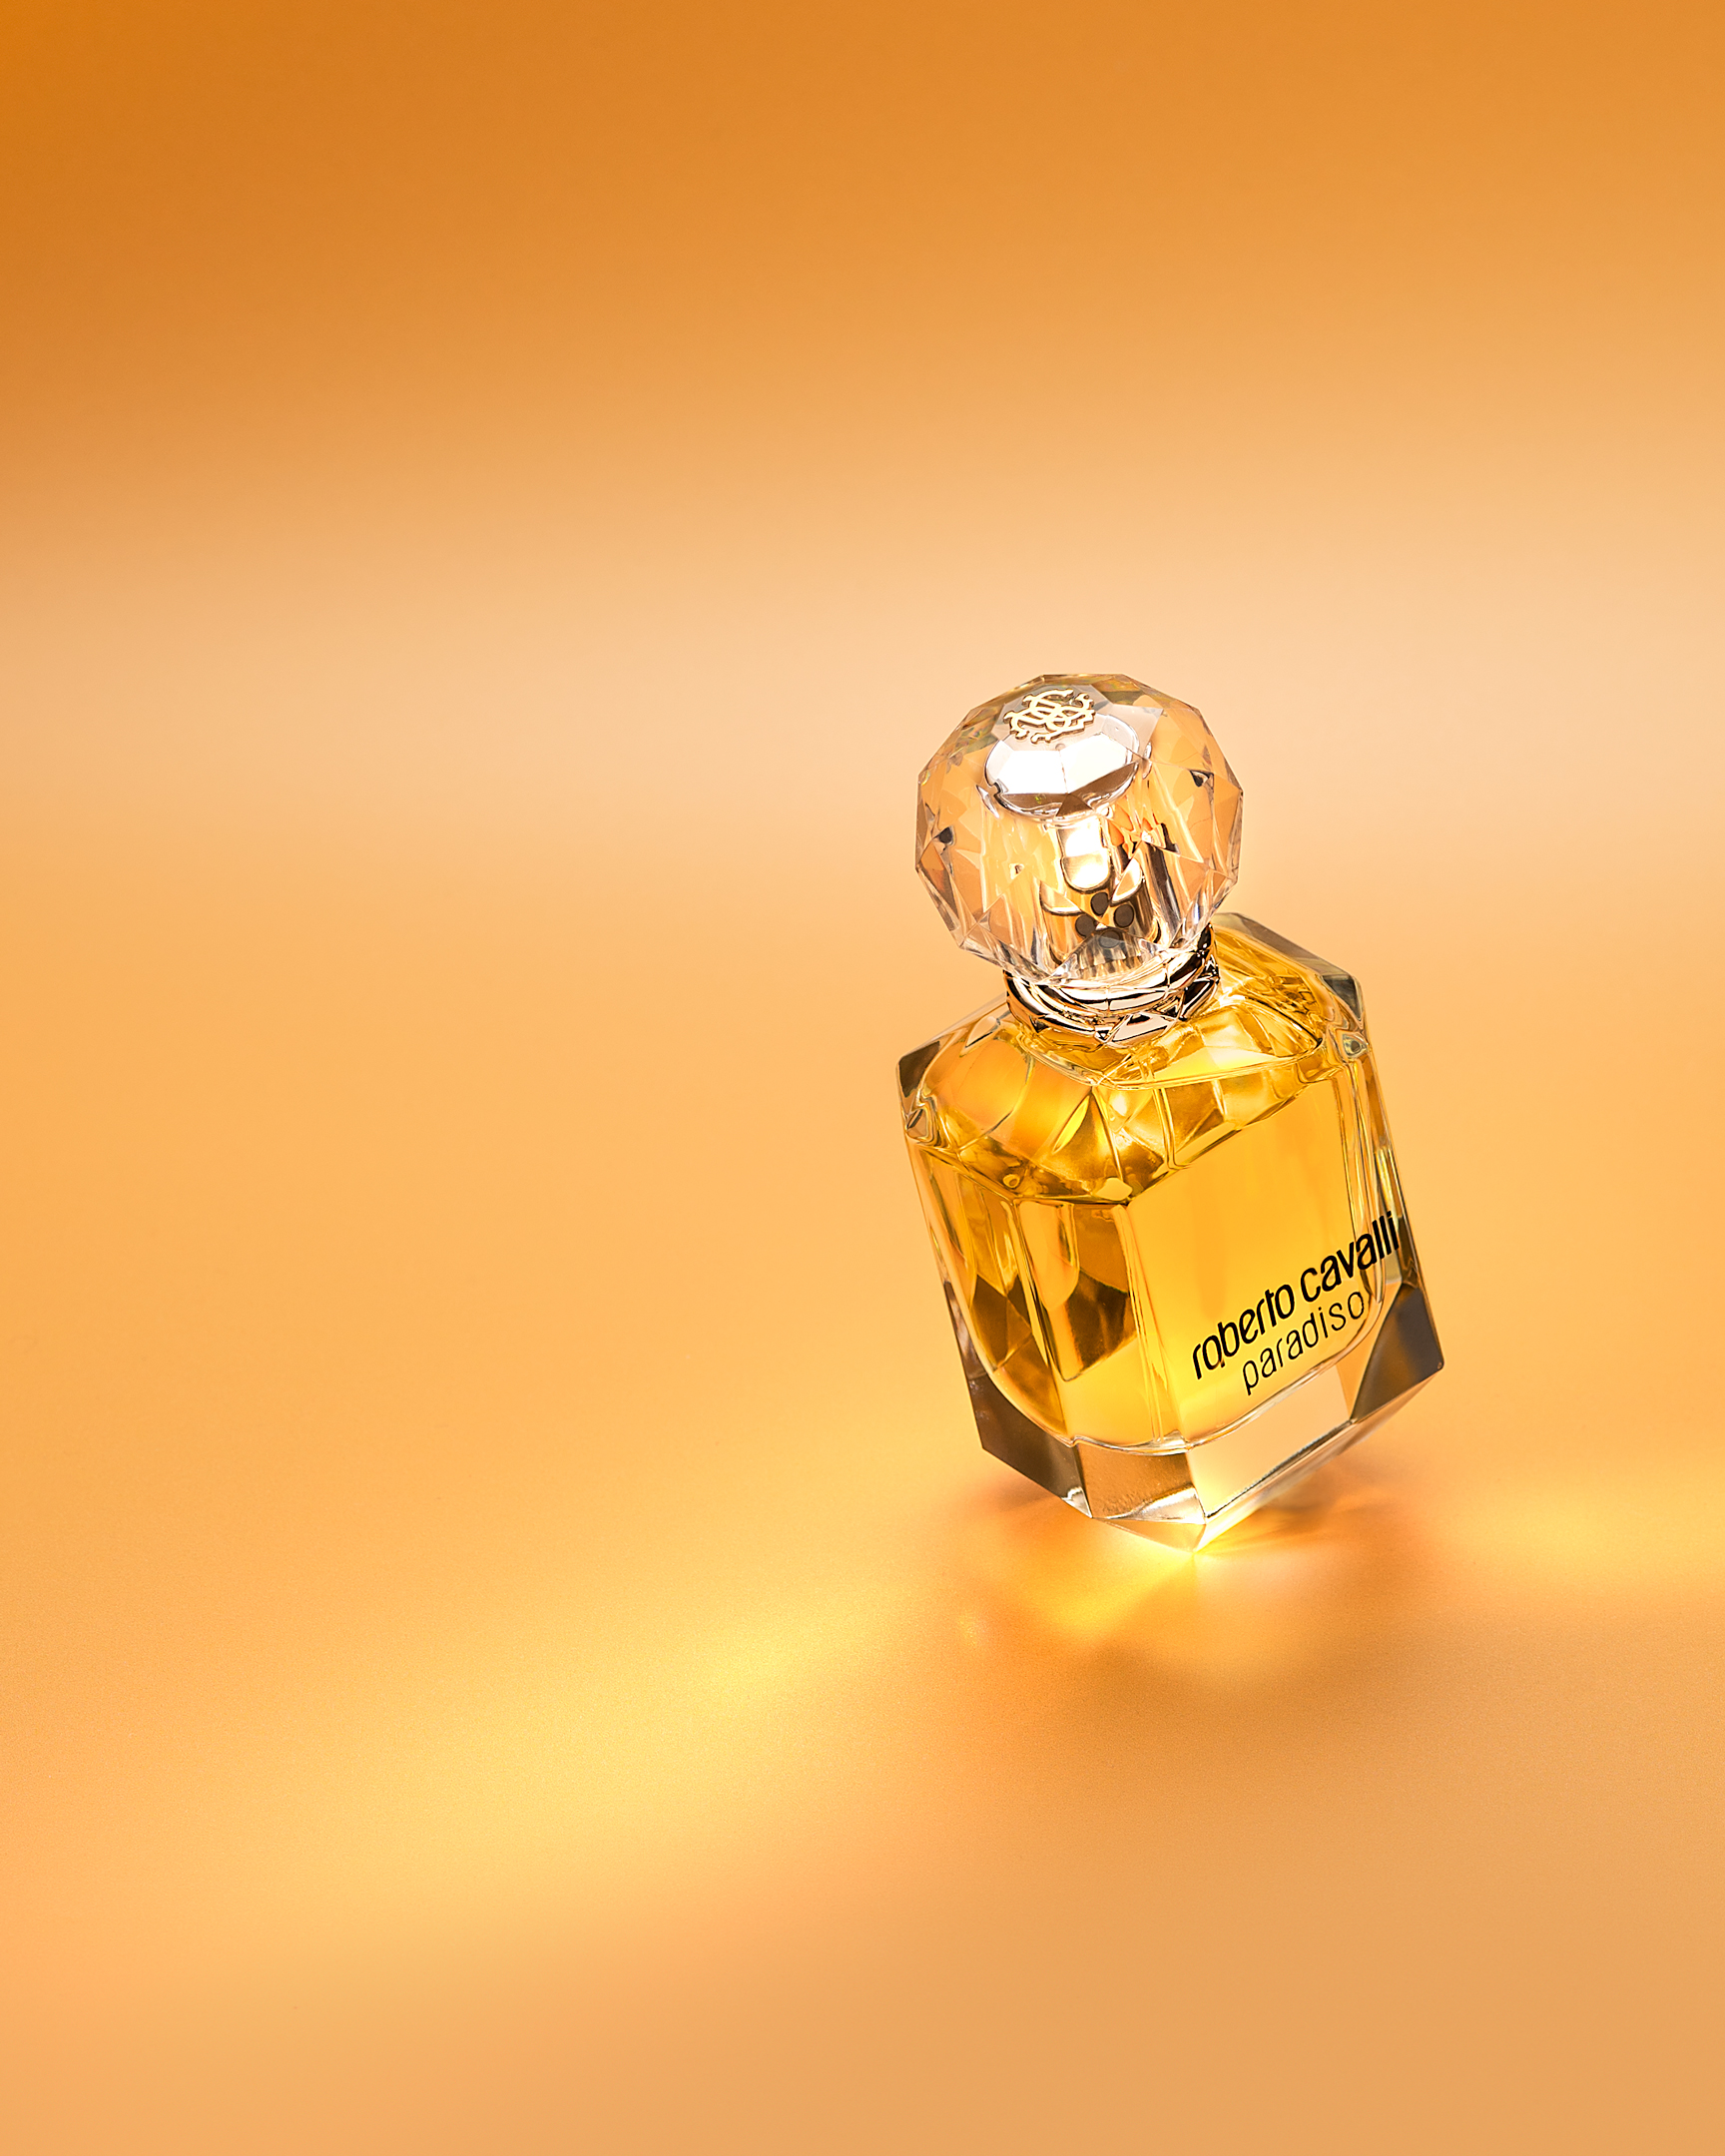 Perfume bottle photography in diffused lighting and minimalistic styling.